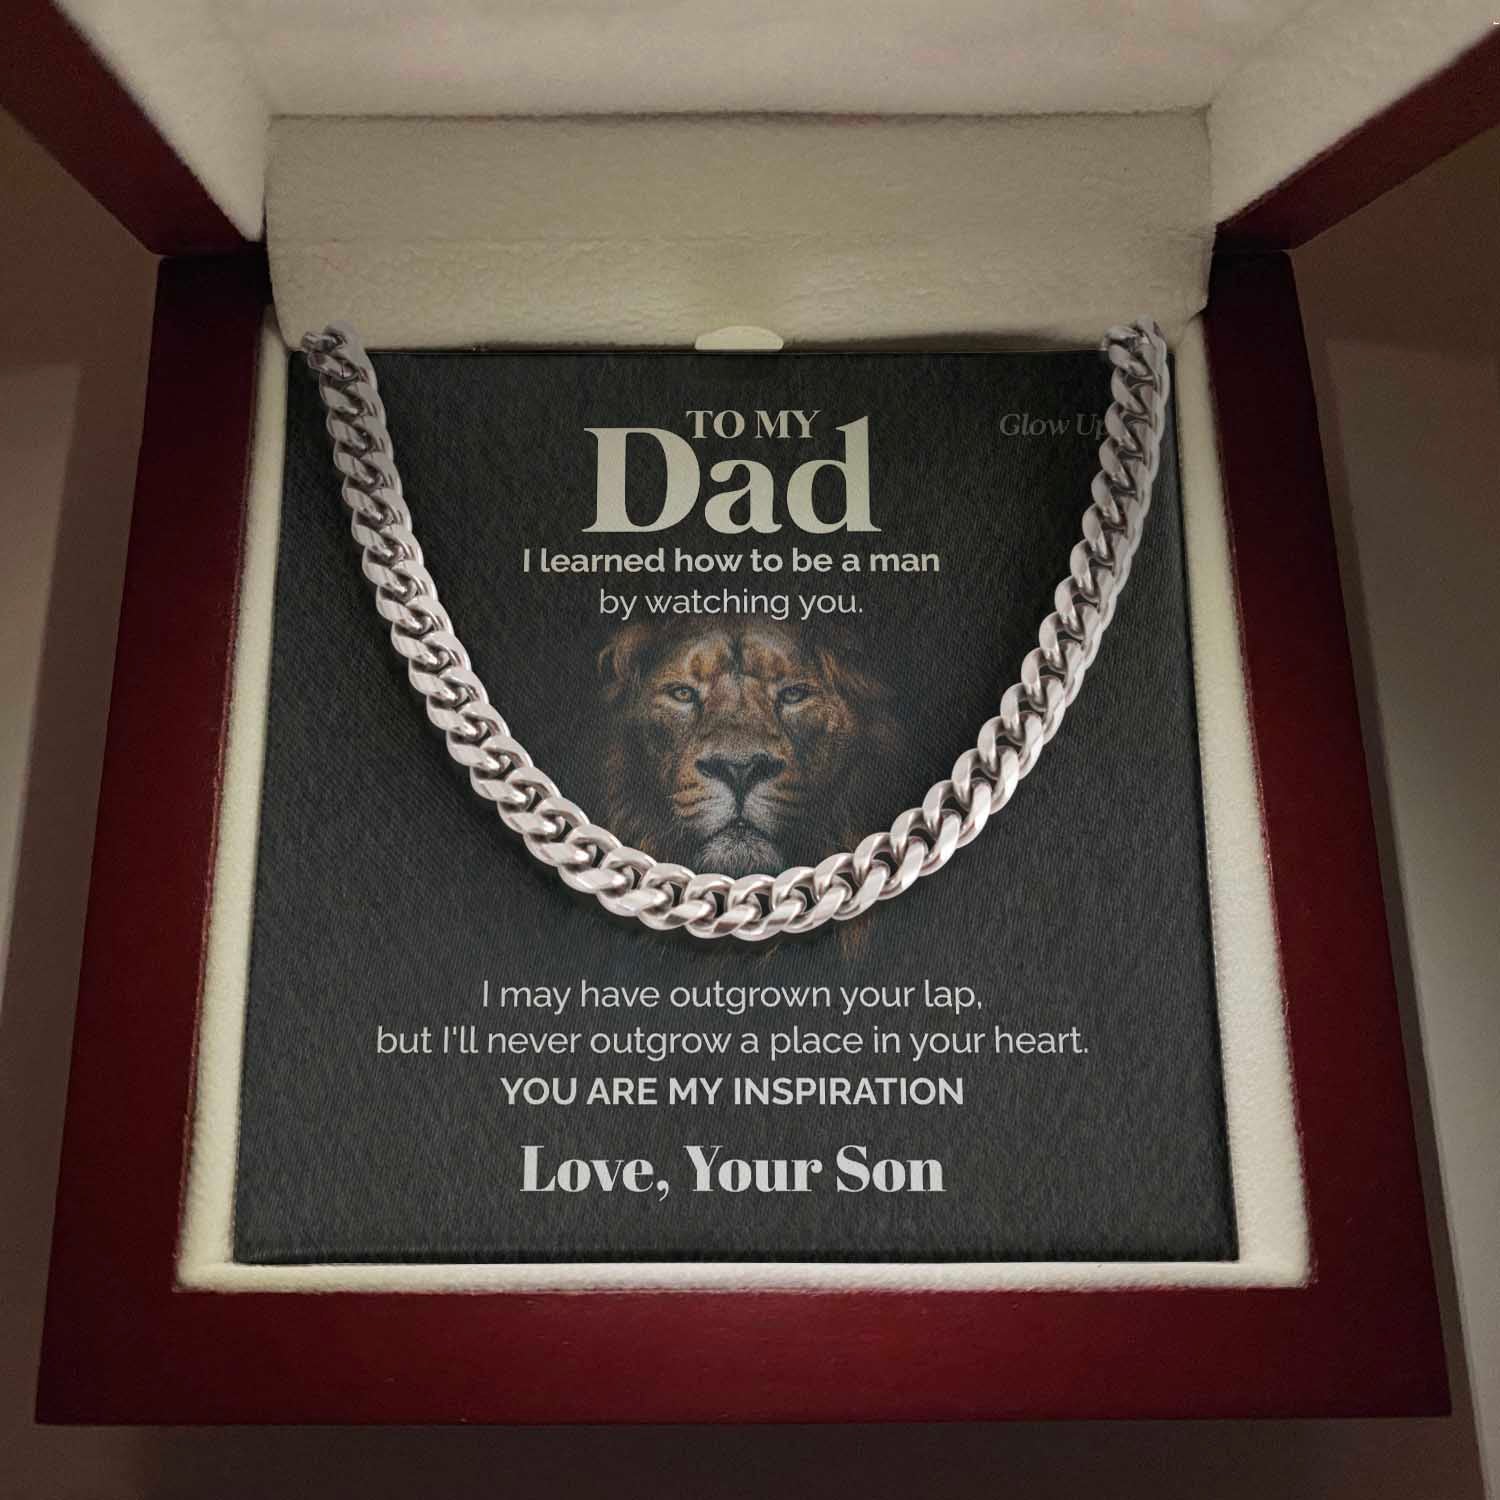 ShineOn Fulfillment Jewelry 316L Stainless Steel / Two-Toned Box To my Dad - My Inspiration - Cuban Link Chain